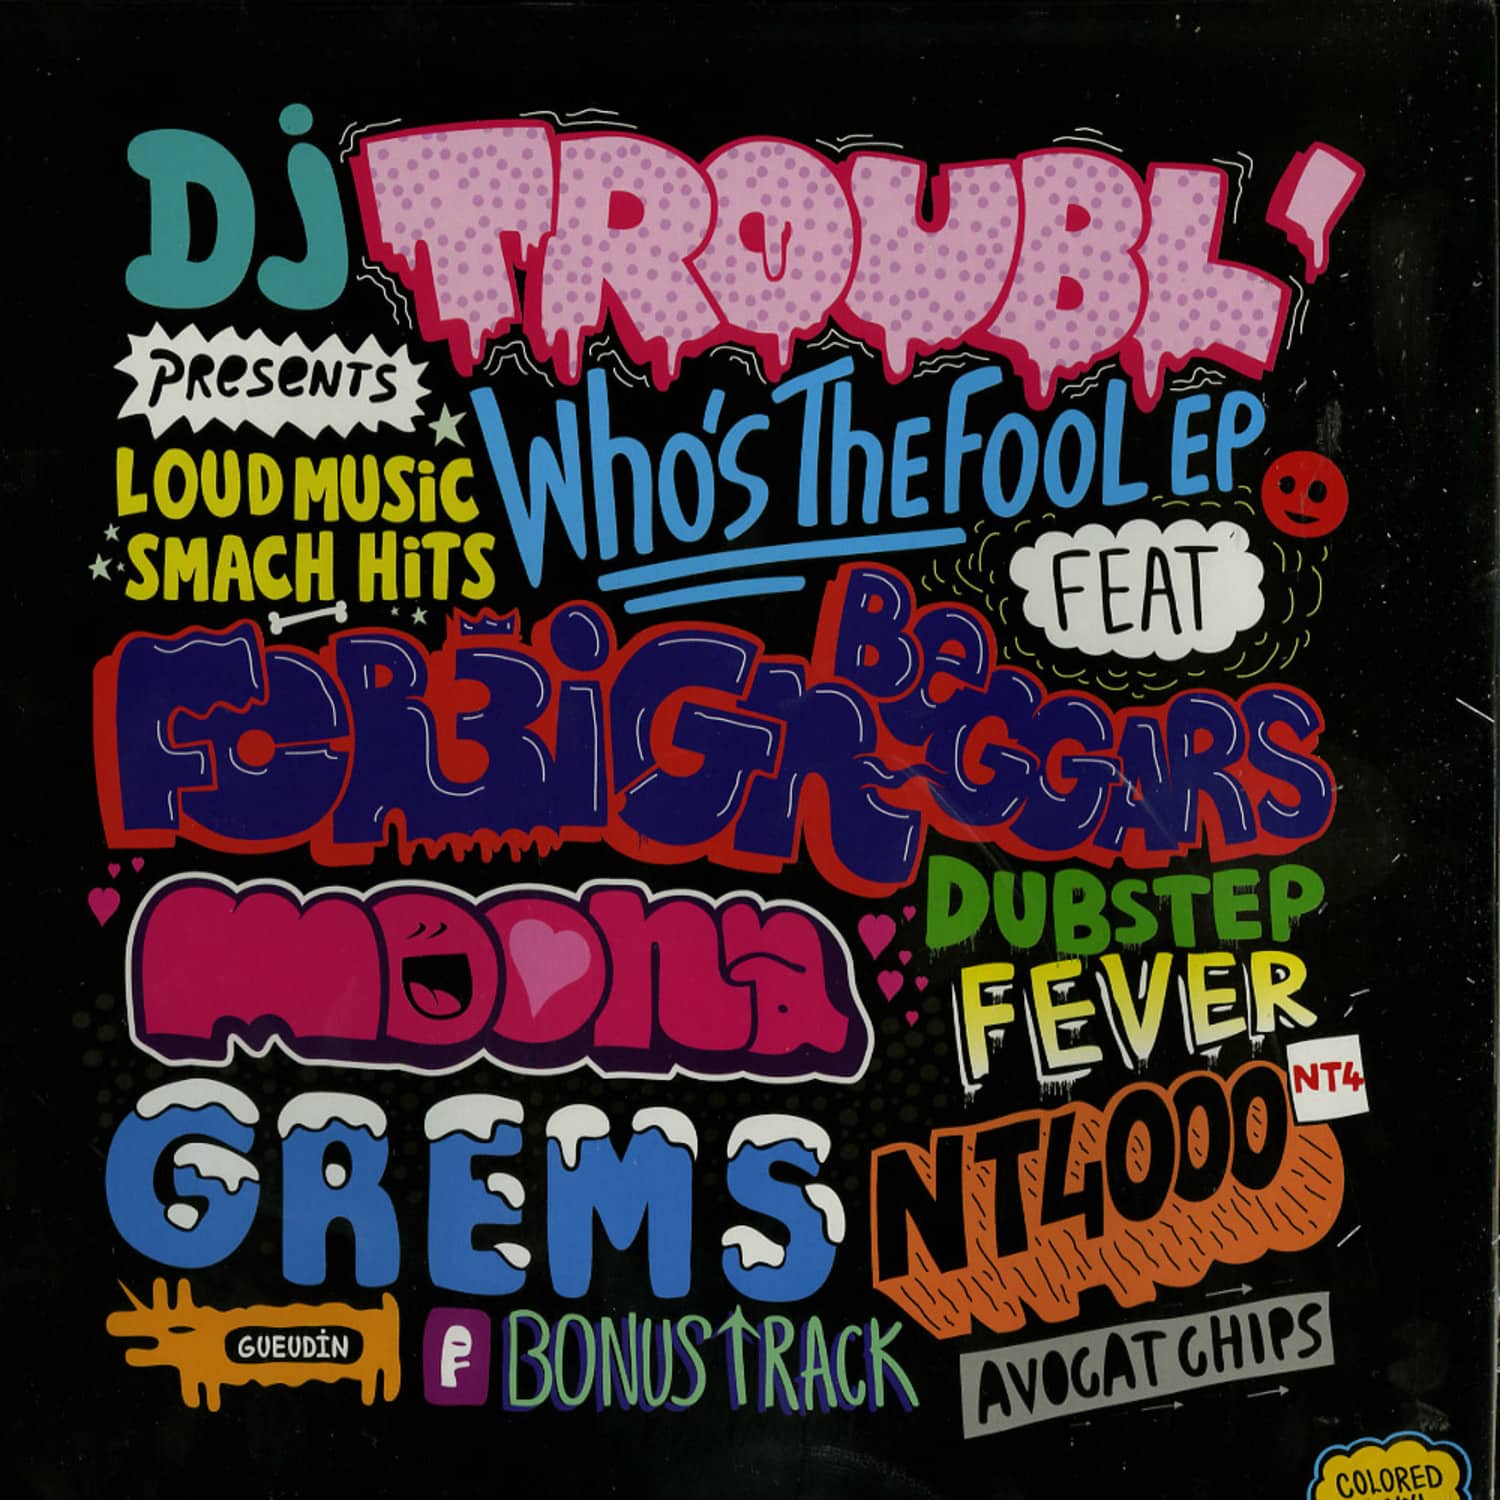 DJ Troubl - WHOS THE FOOL EP 